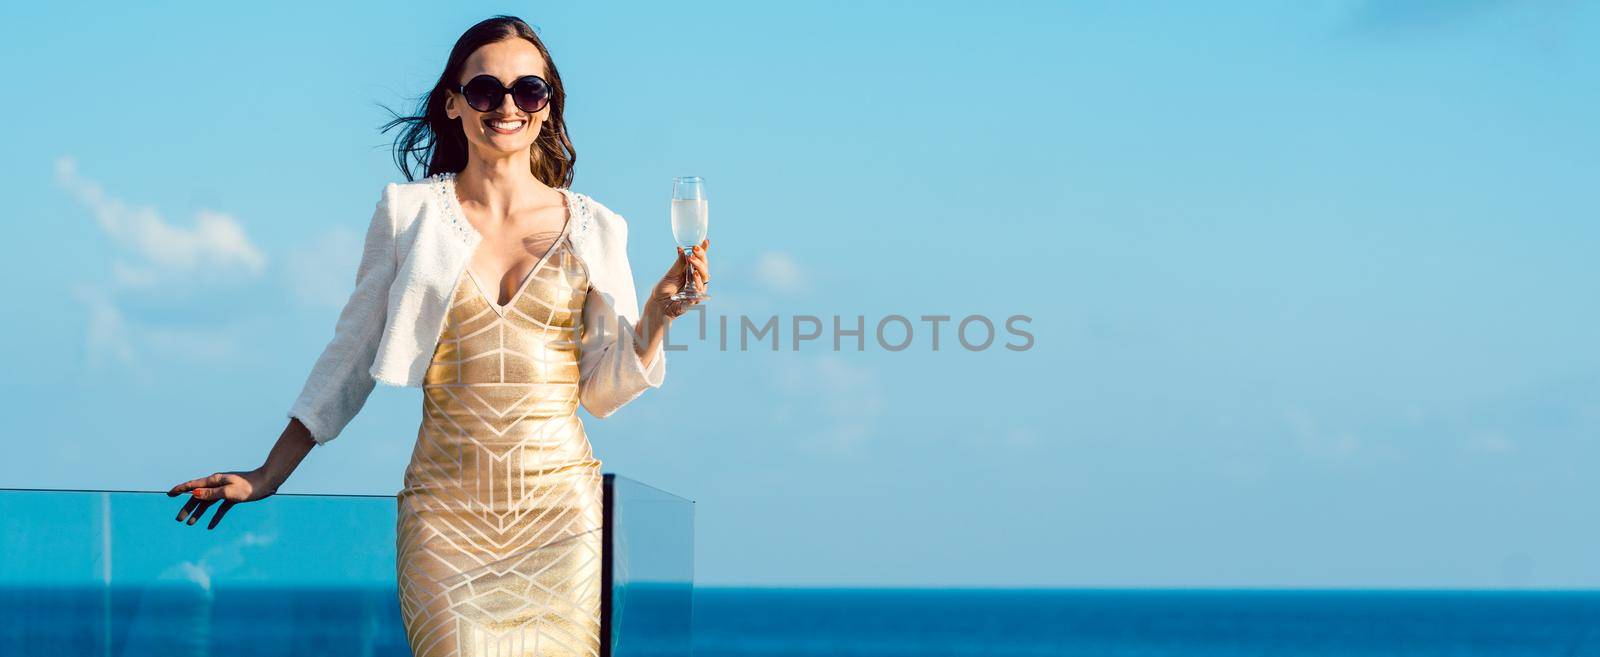 Woman drinking sparkling wine looking over ocean wearing an expensive dress